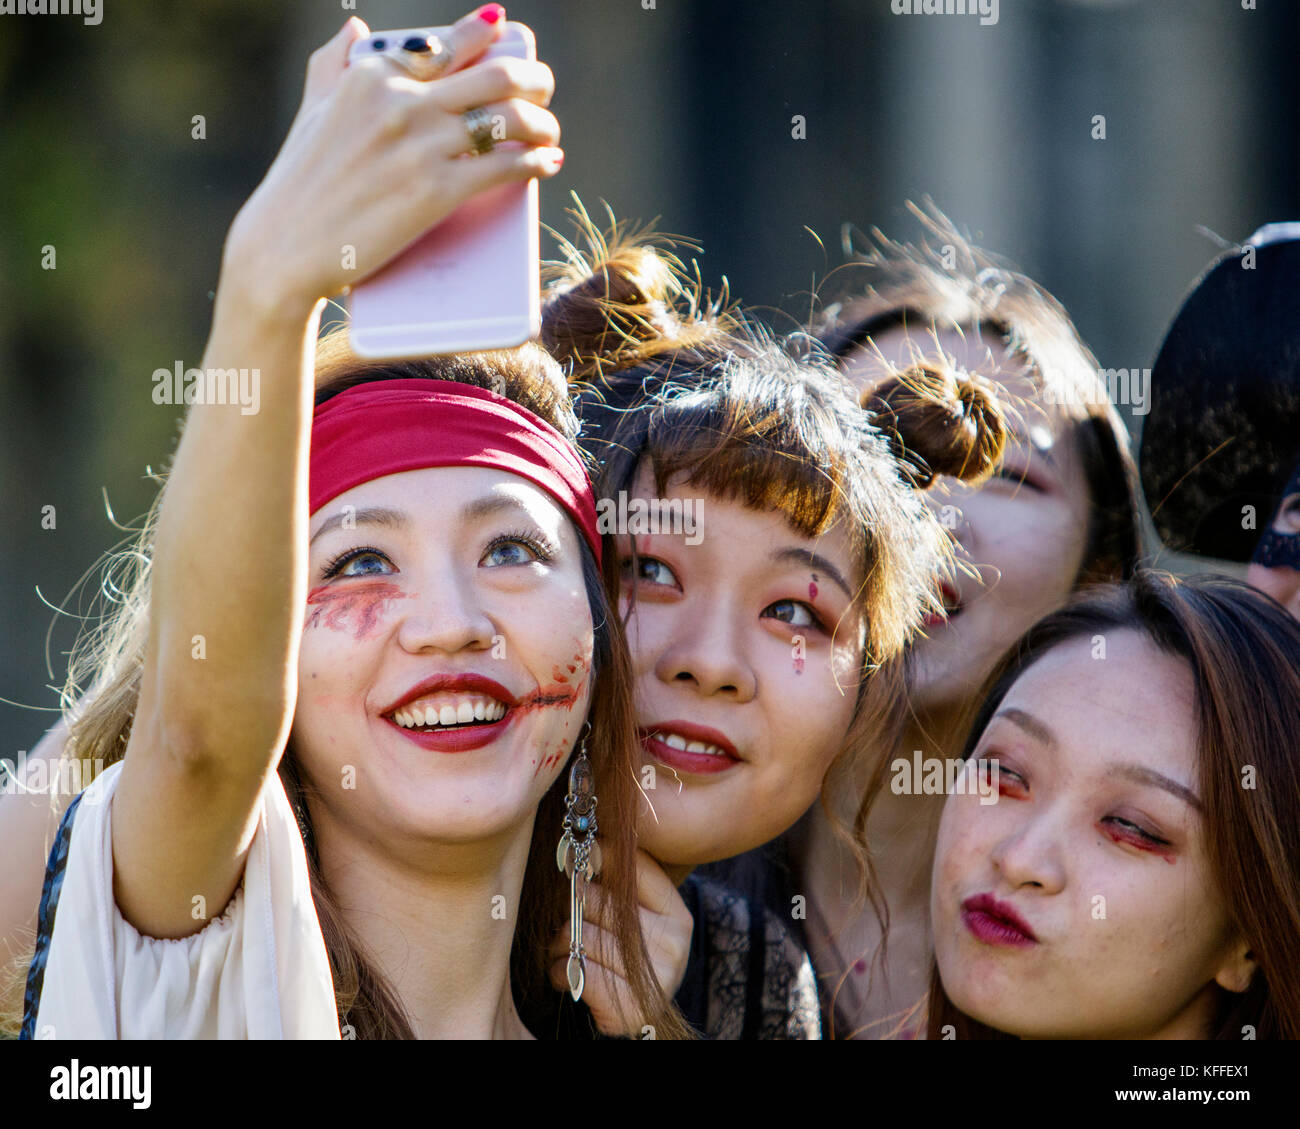 Bristol, UK. 28th Oct, 2017. A group of women dressed as zombies and taking part in a zombie walk through the city centre are pictured as they pose for a selfie. Stock Photo